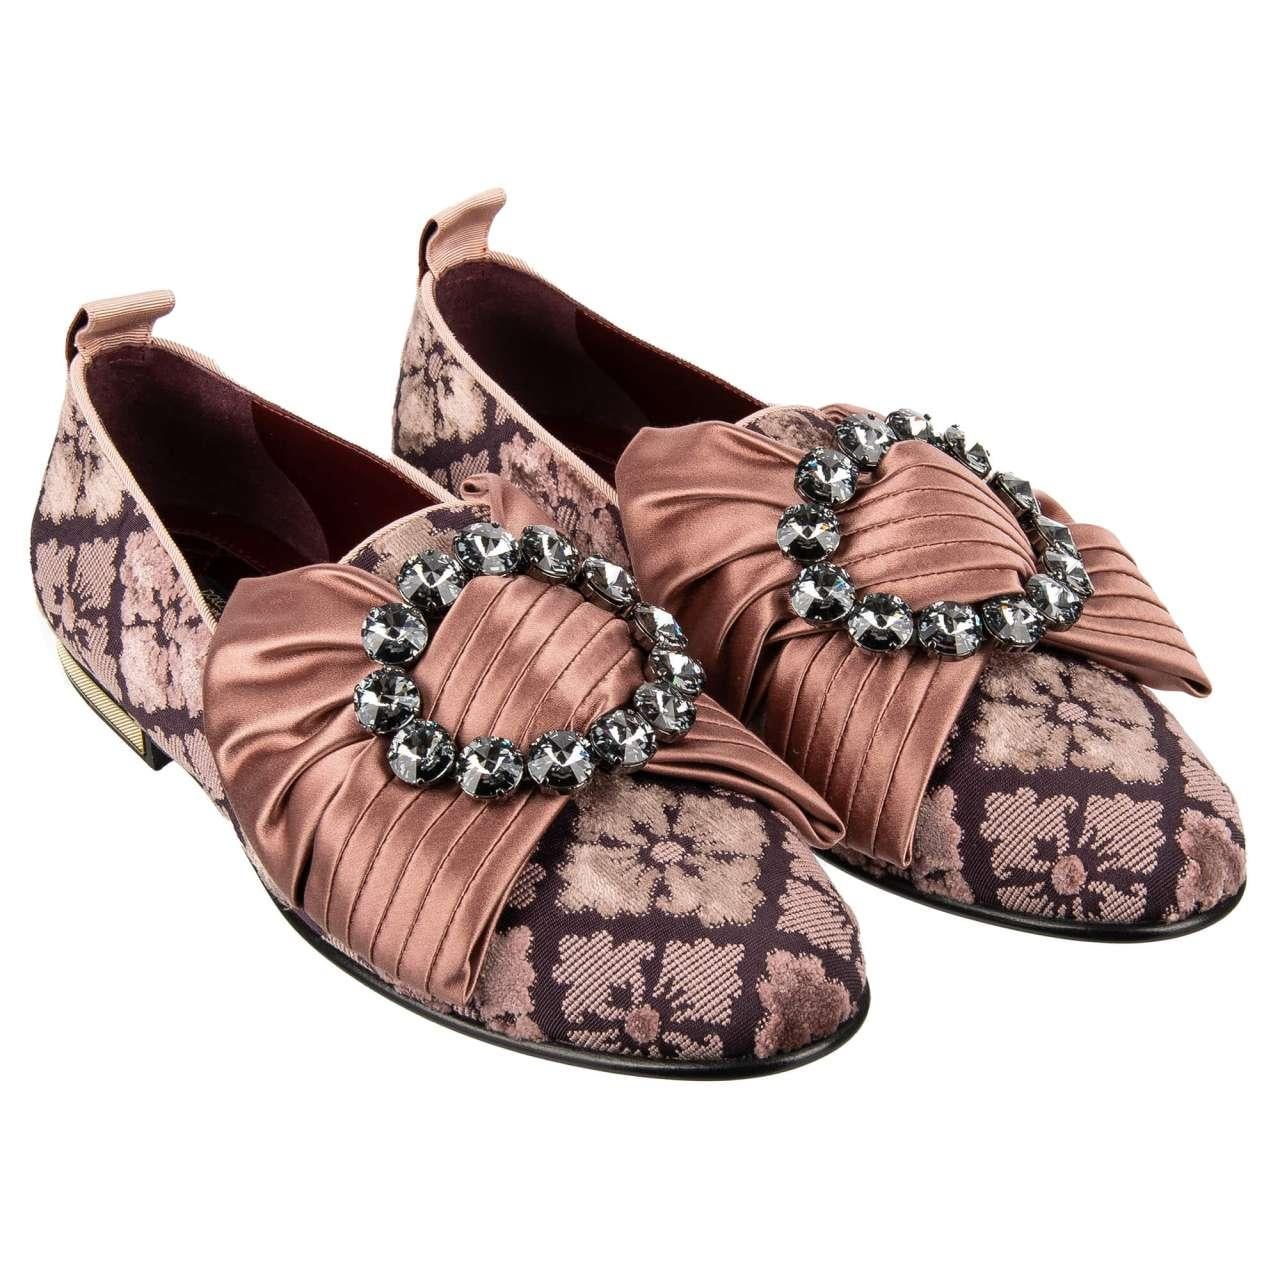 D&G Jacquard Loafer Ballet Flats Shoes YOUNG QUEEN w. Crystal Brooch Pink 39 9 For Sale 2